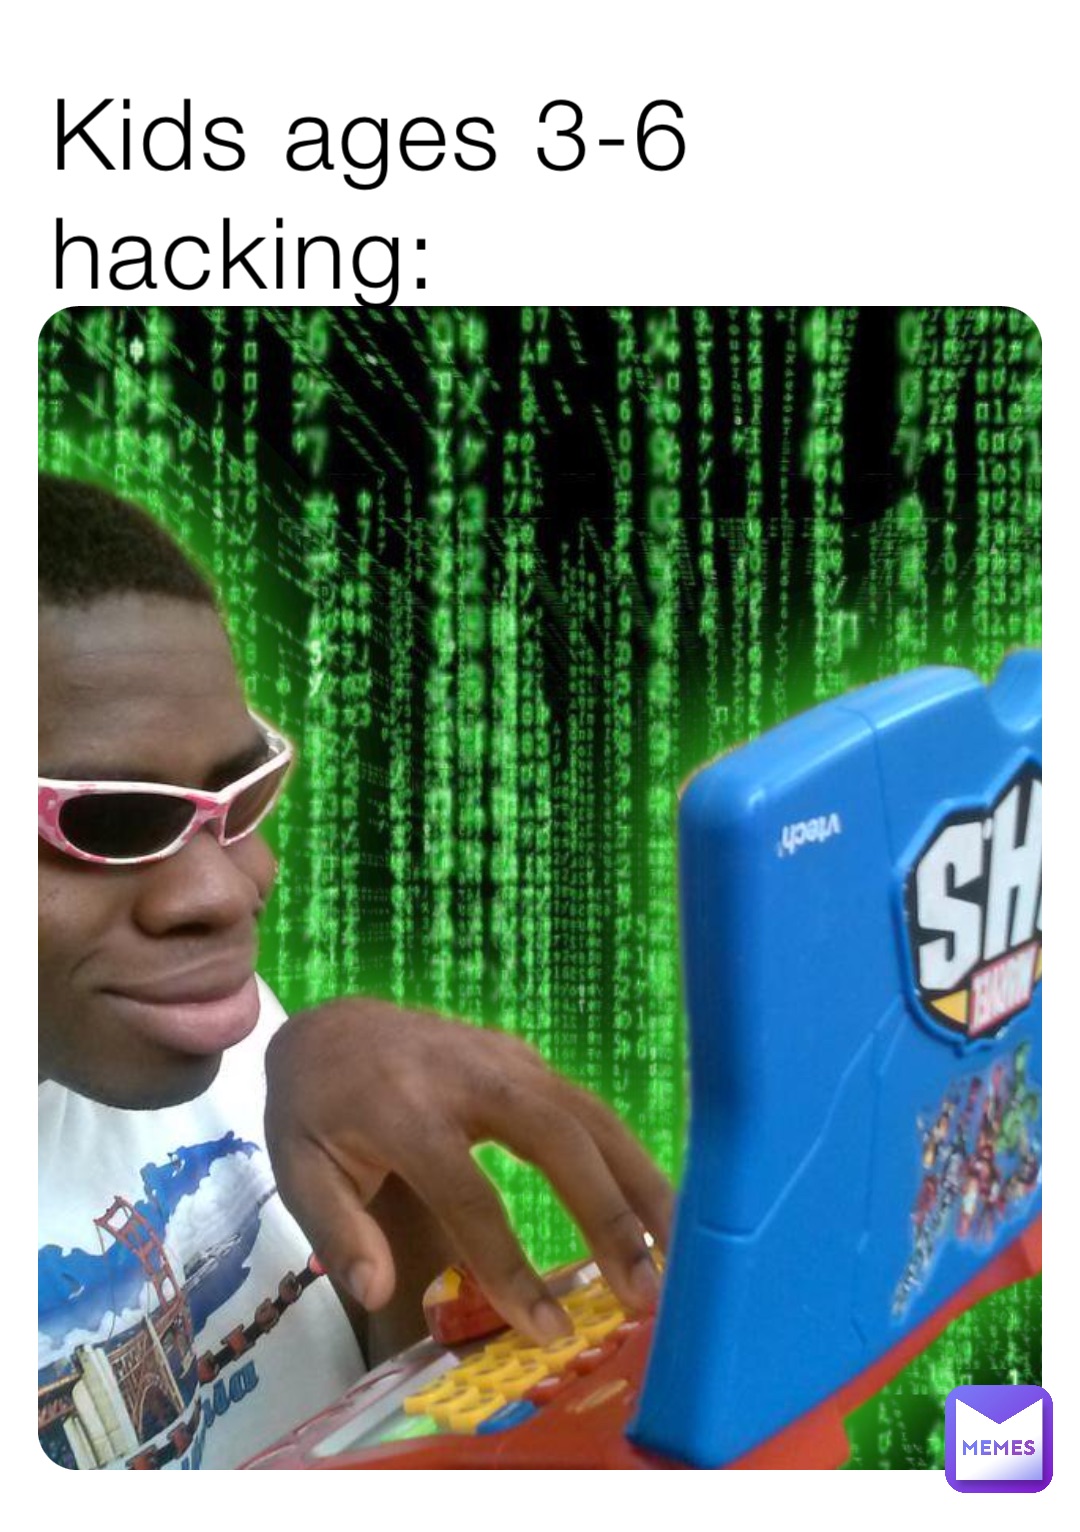 Kids ages 3-6 hacking: